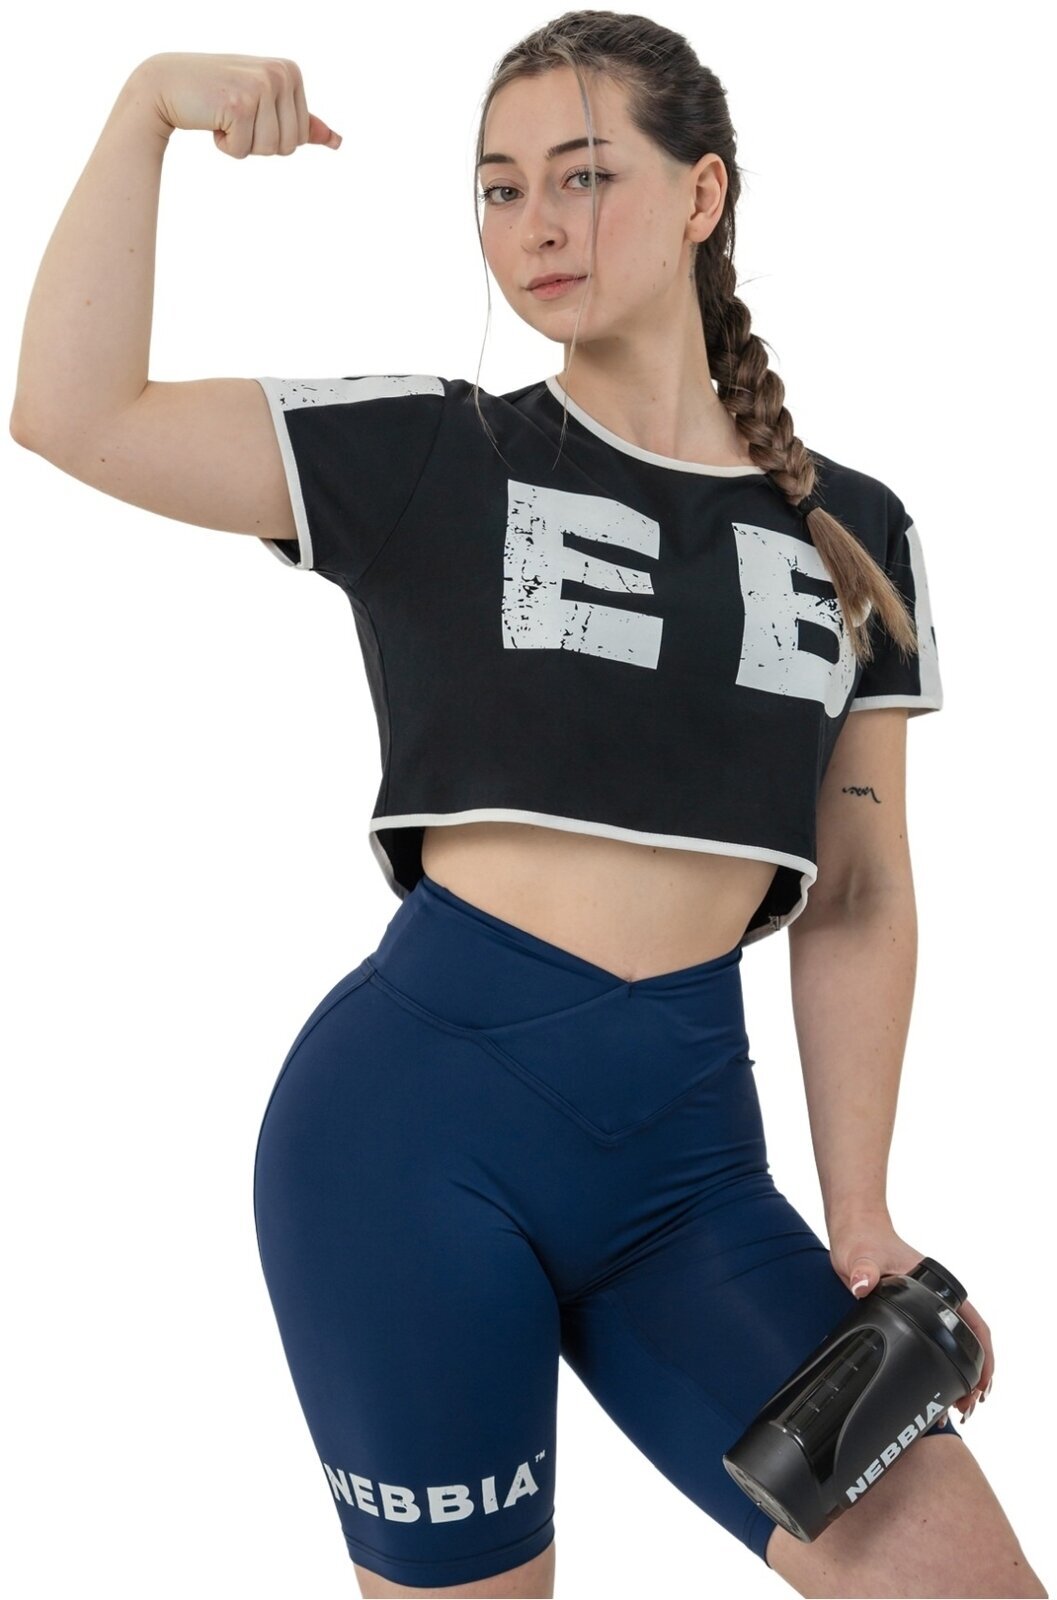 Fitness shirt Nebbia Oversized Crop Top Game On Black XS Fitness shirt